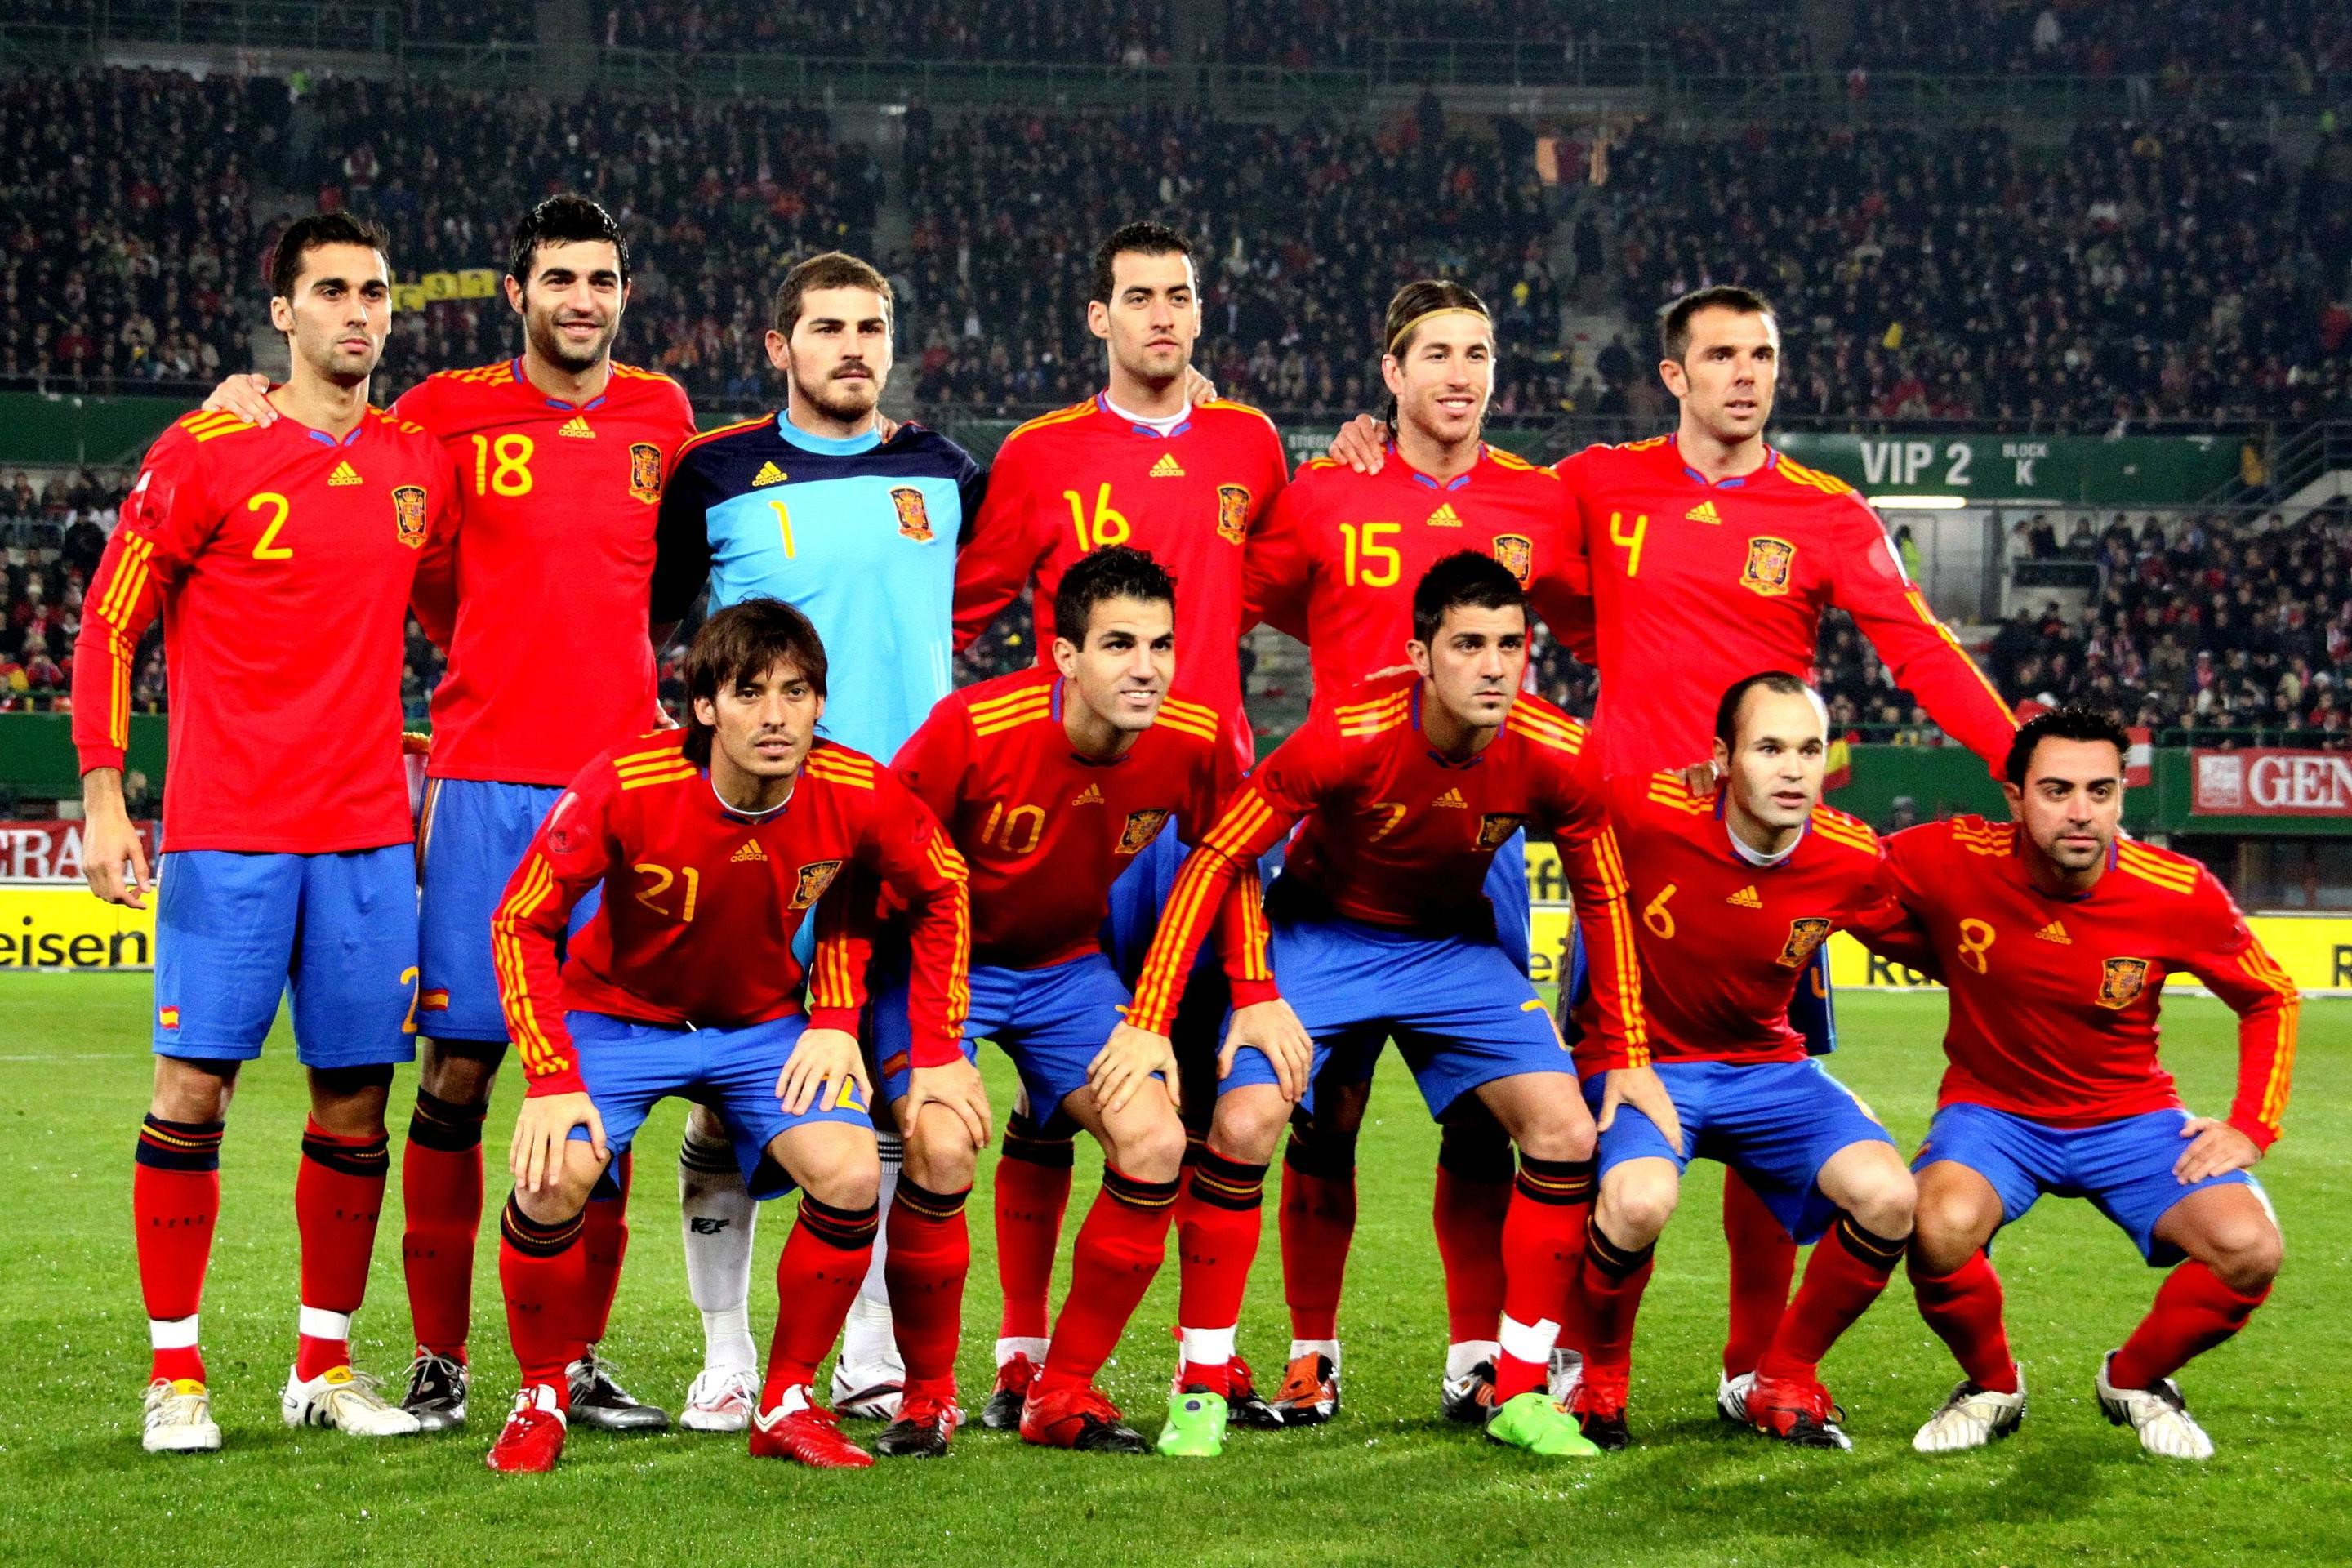 2880x1920 Spain Football Team HD Images Find best latest Spain Football Team HD  Images for your PC